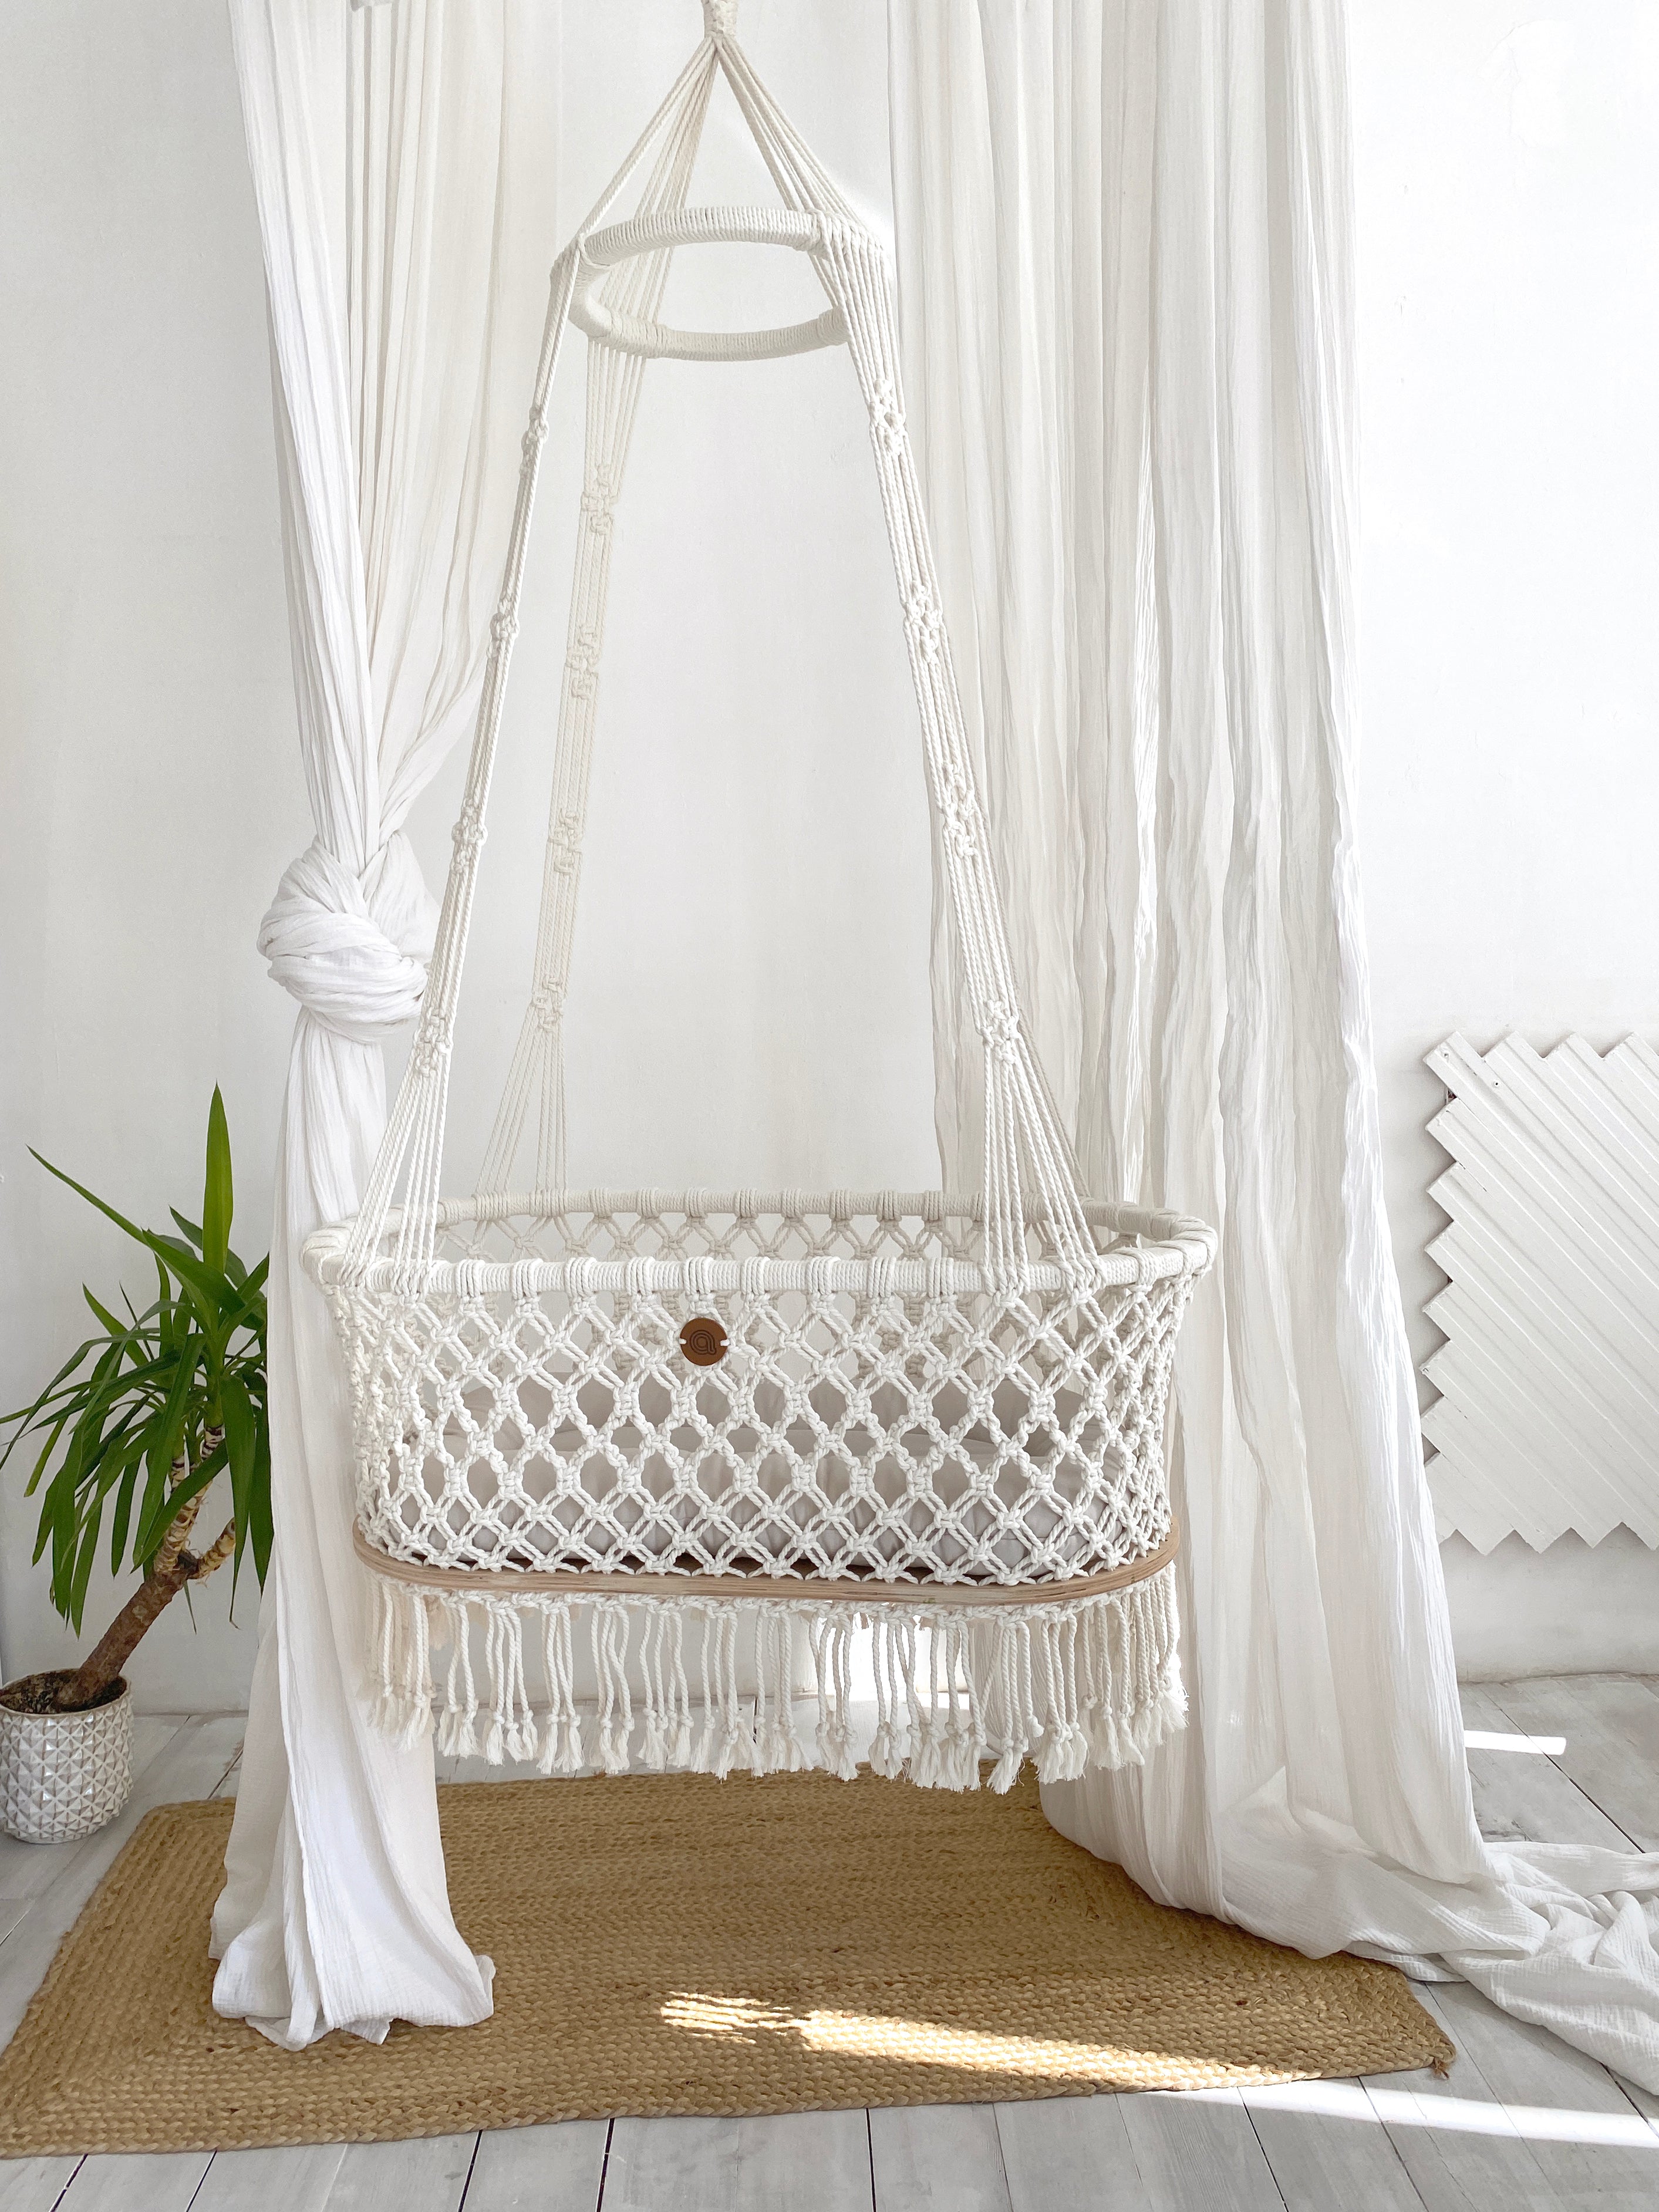 Hanging baby bassinet – Home